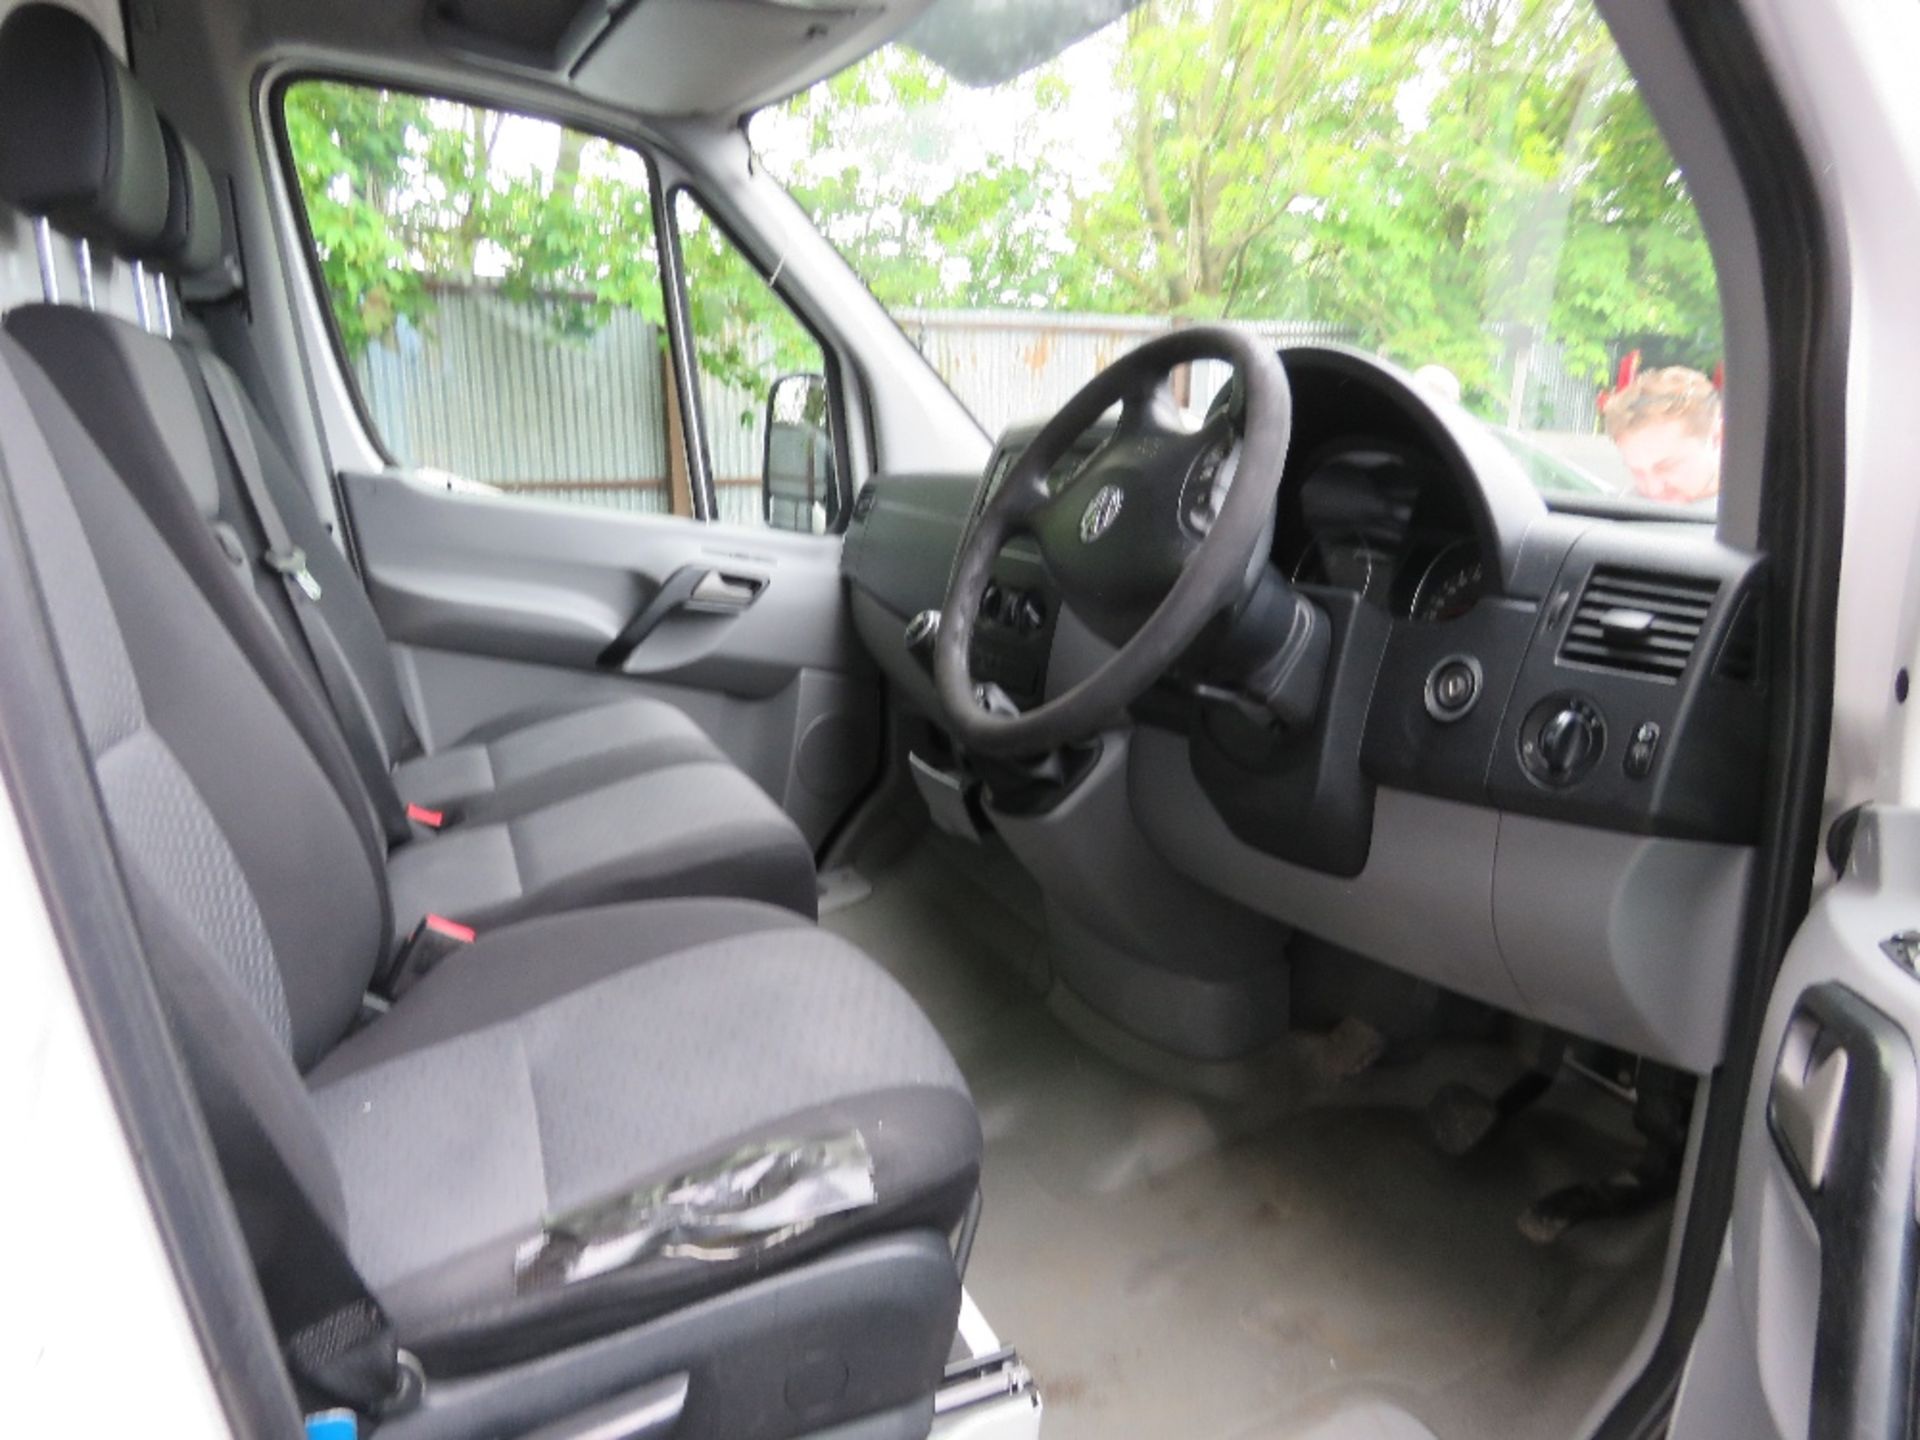 VOLKSWAGEN CRAFTER DROP SIDE TRUCK, YEAR 2015 REGISTERED, DIRECT FROM COMPANY LIQUIDATION. 13FT LENG - Image 10 of 13